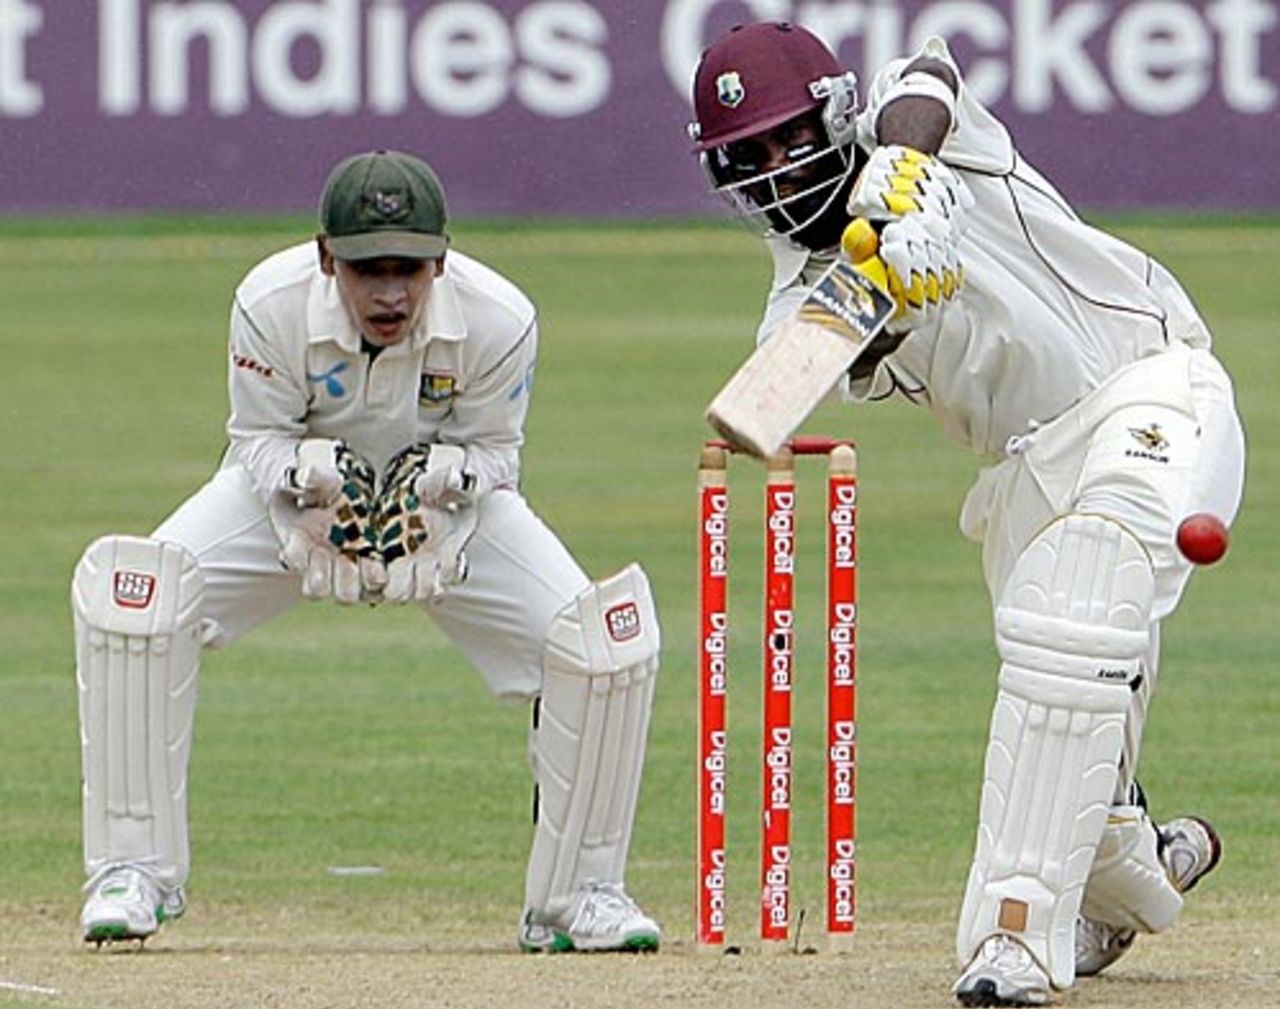 Dale Richards lobs a catch back to Mahmudullah, West Indies v Bangladesh, 2nd Test, Grenada, 1st day, July 17, 2009